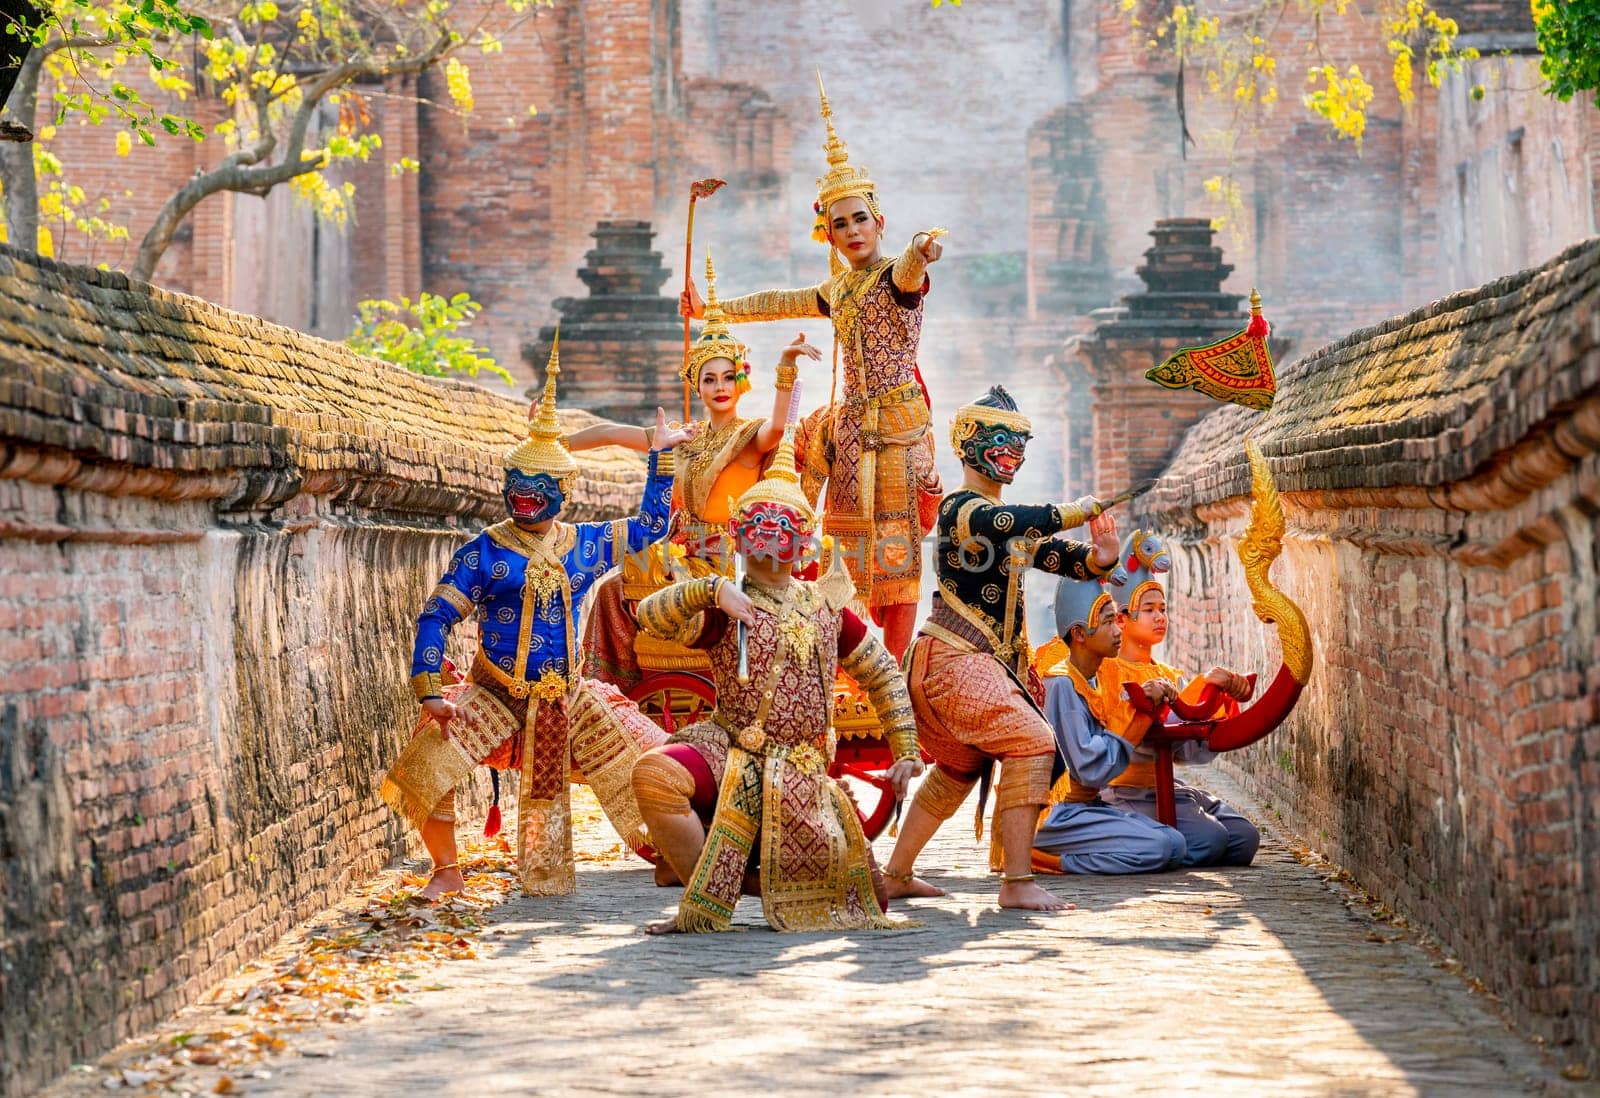 Small group of Khon or traditional Thai classic masked from the Ramakien characters stand together with action of traditional dance with Thai ancient building in background.